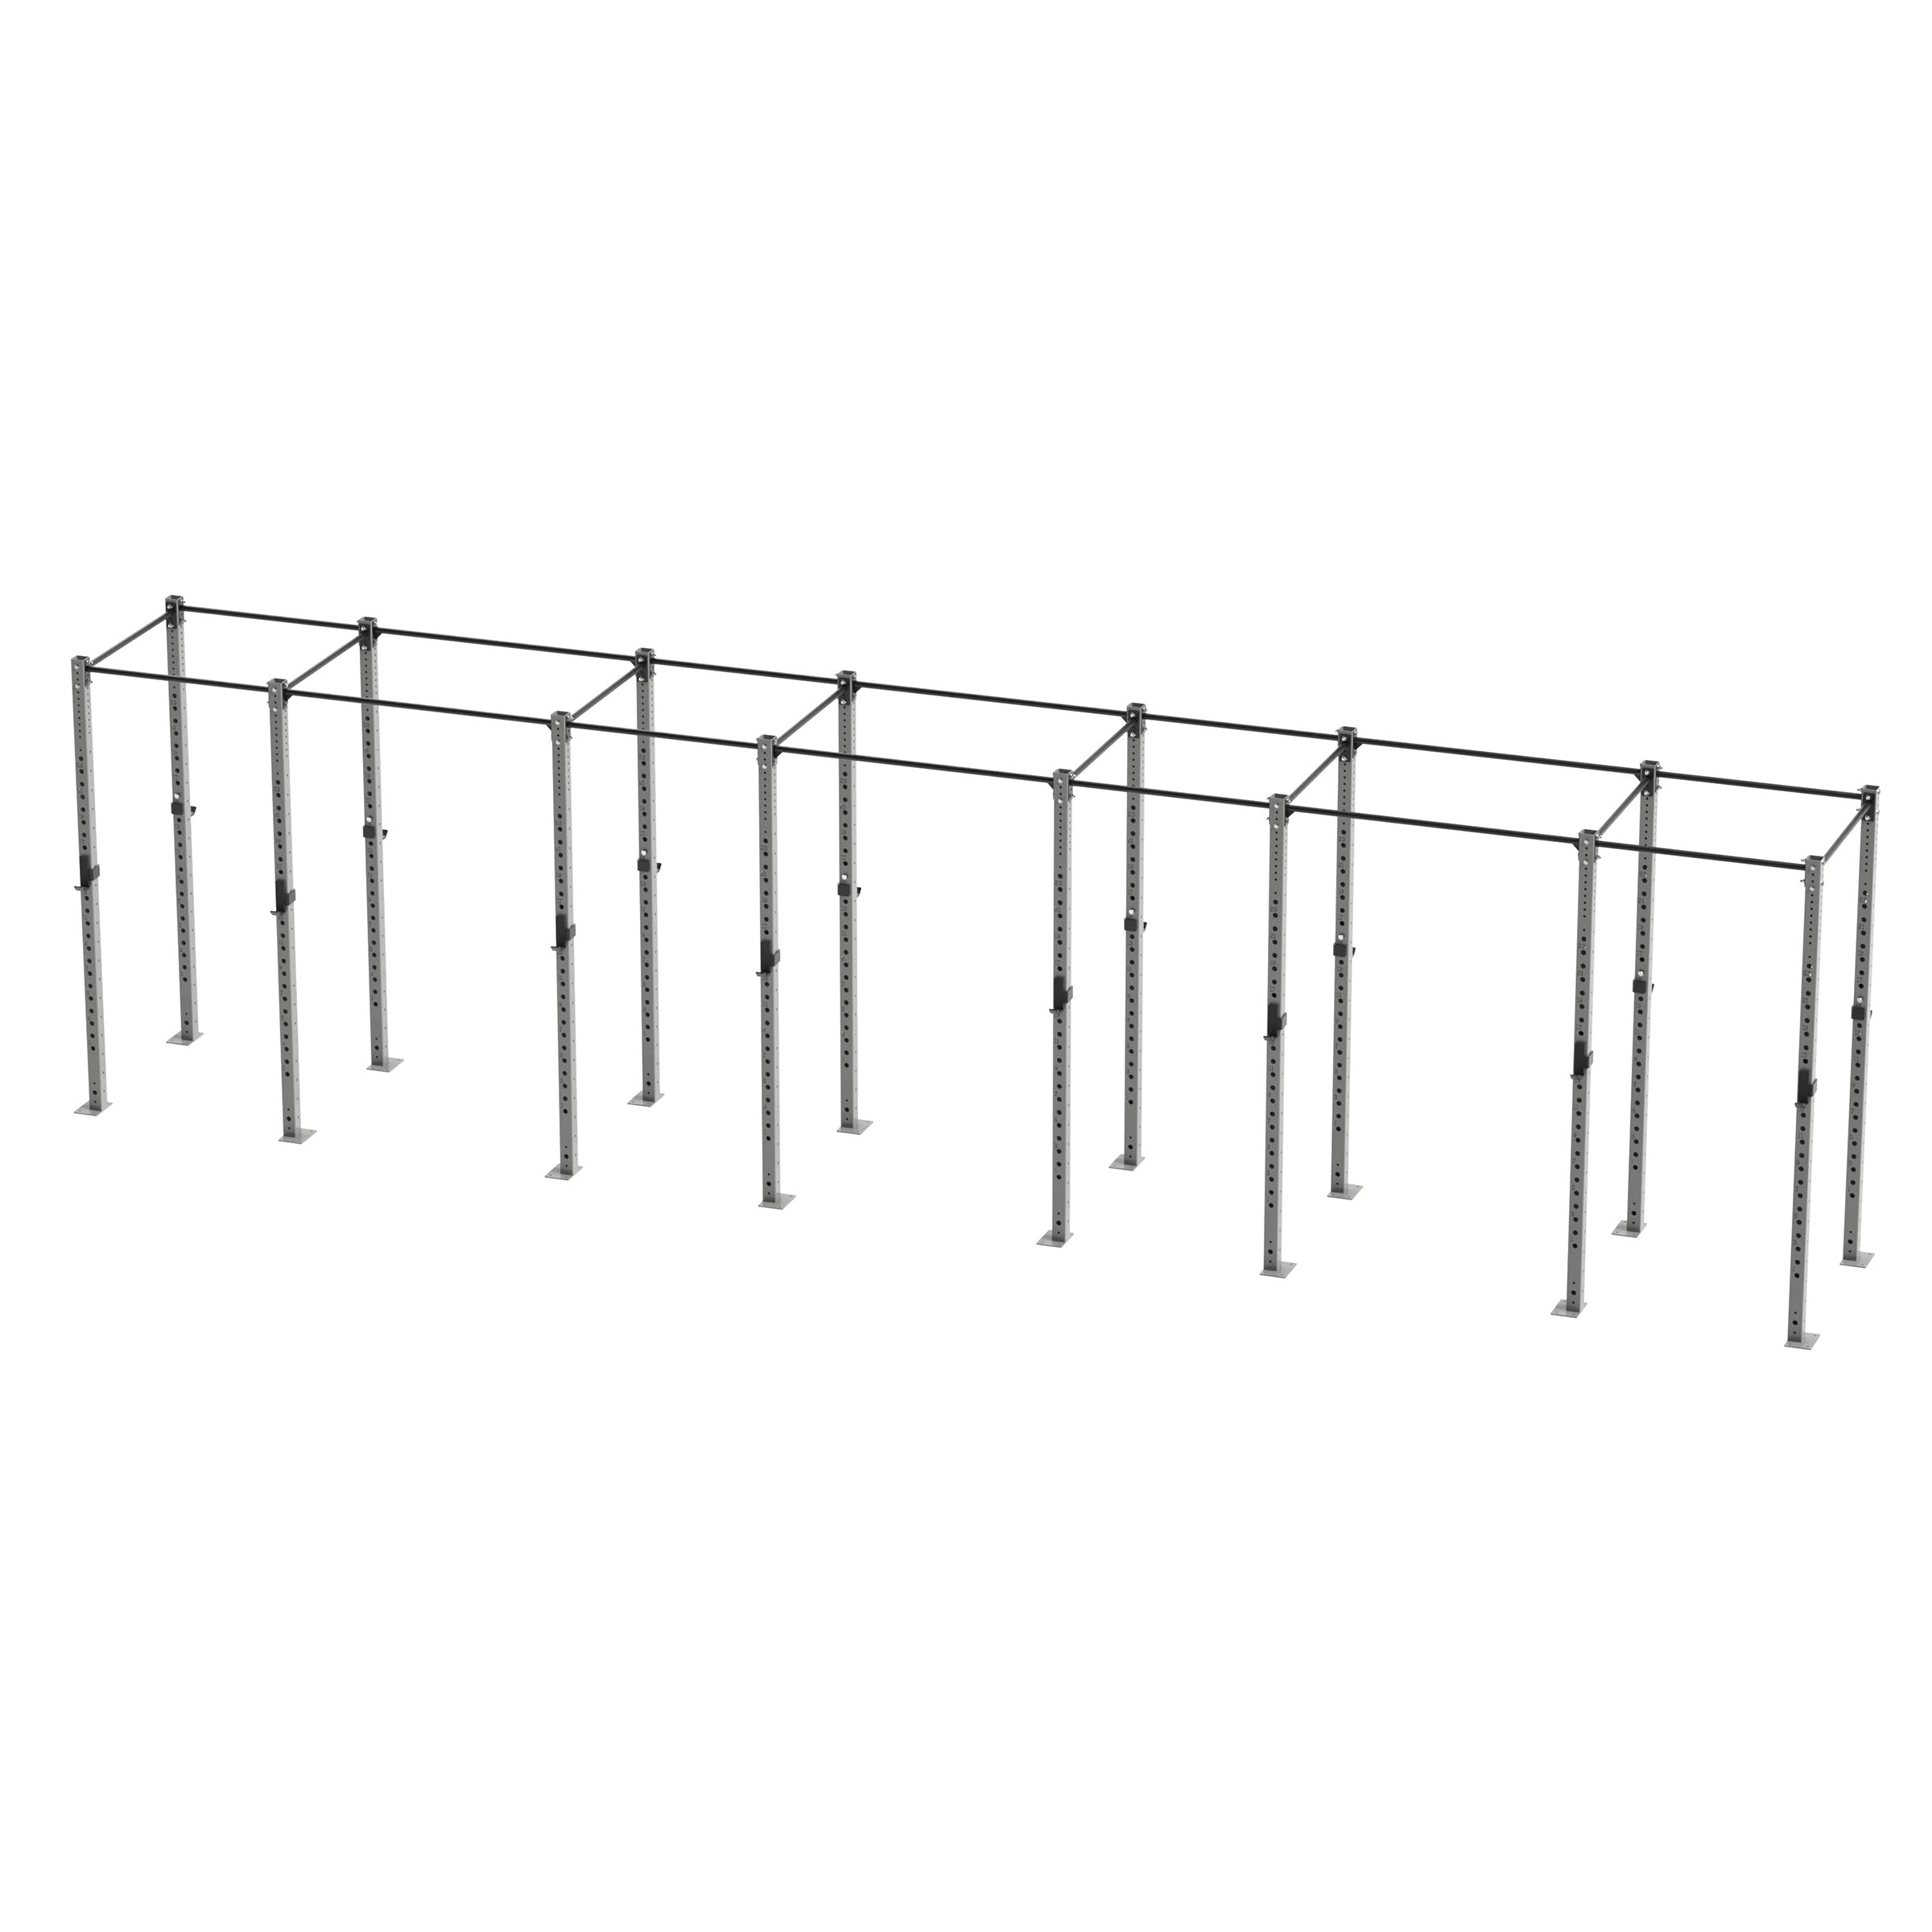 Bison Series - 8 Bay Freestanding Rig - Wolverson Fitness